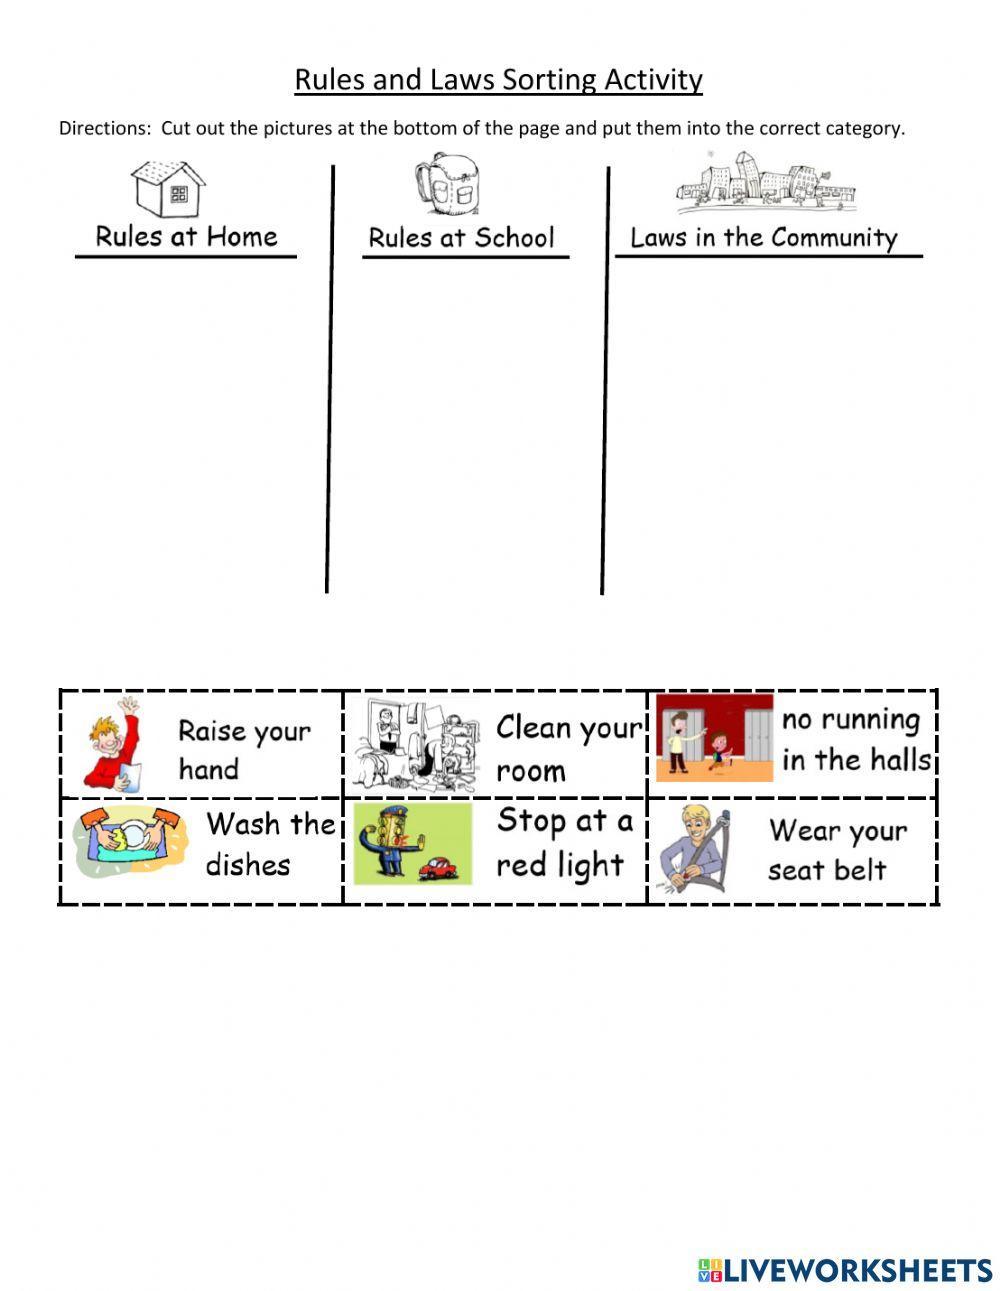 Rules and Laws Sorting Activity